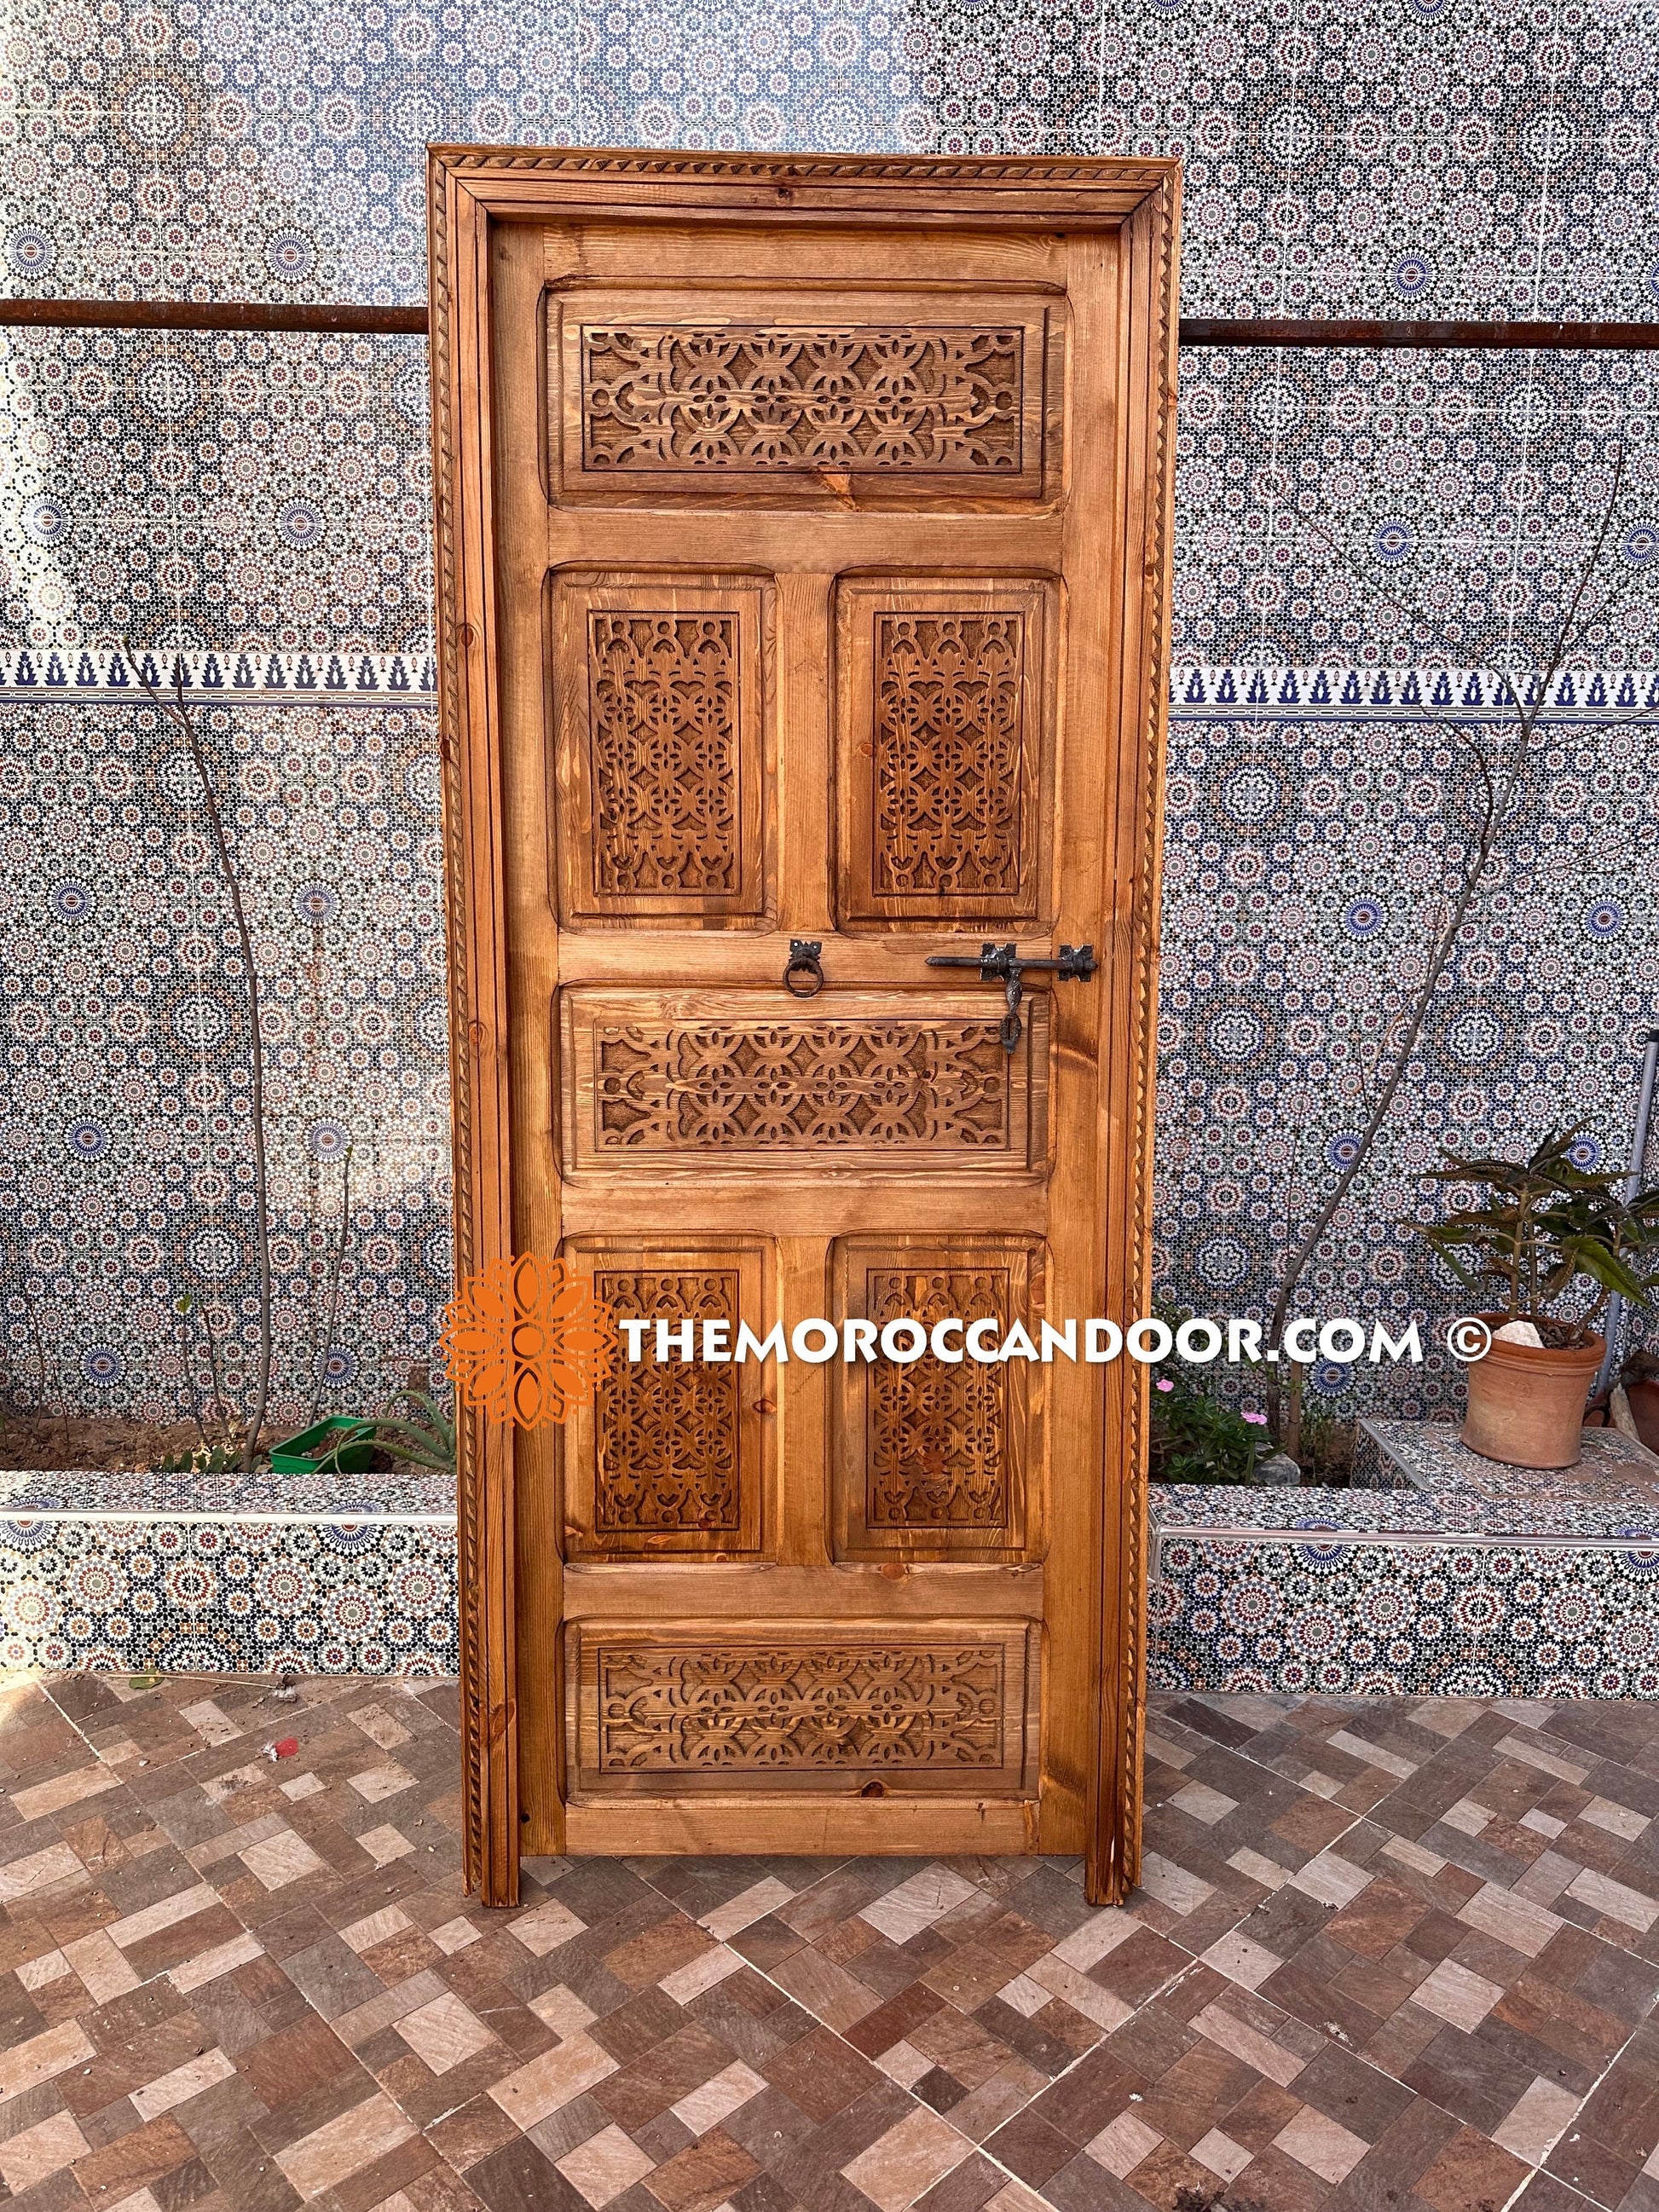 With a custom hand-carved door